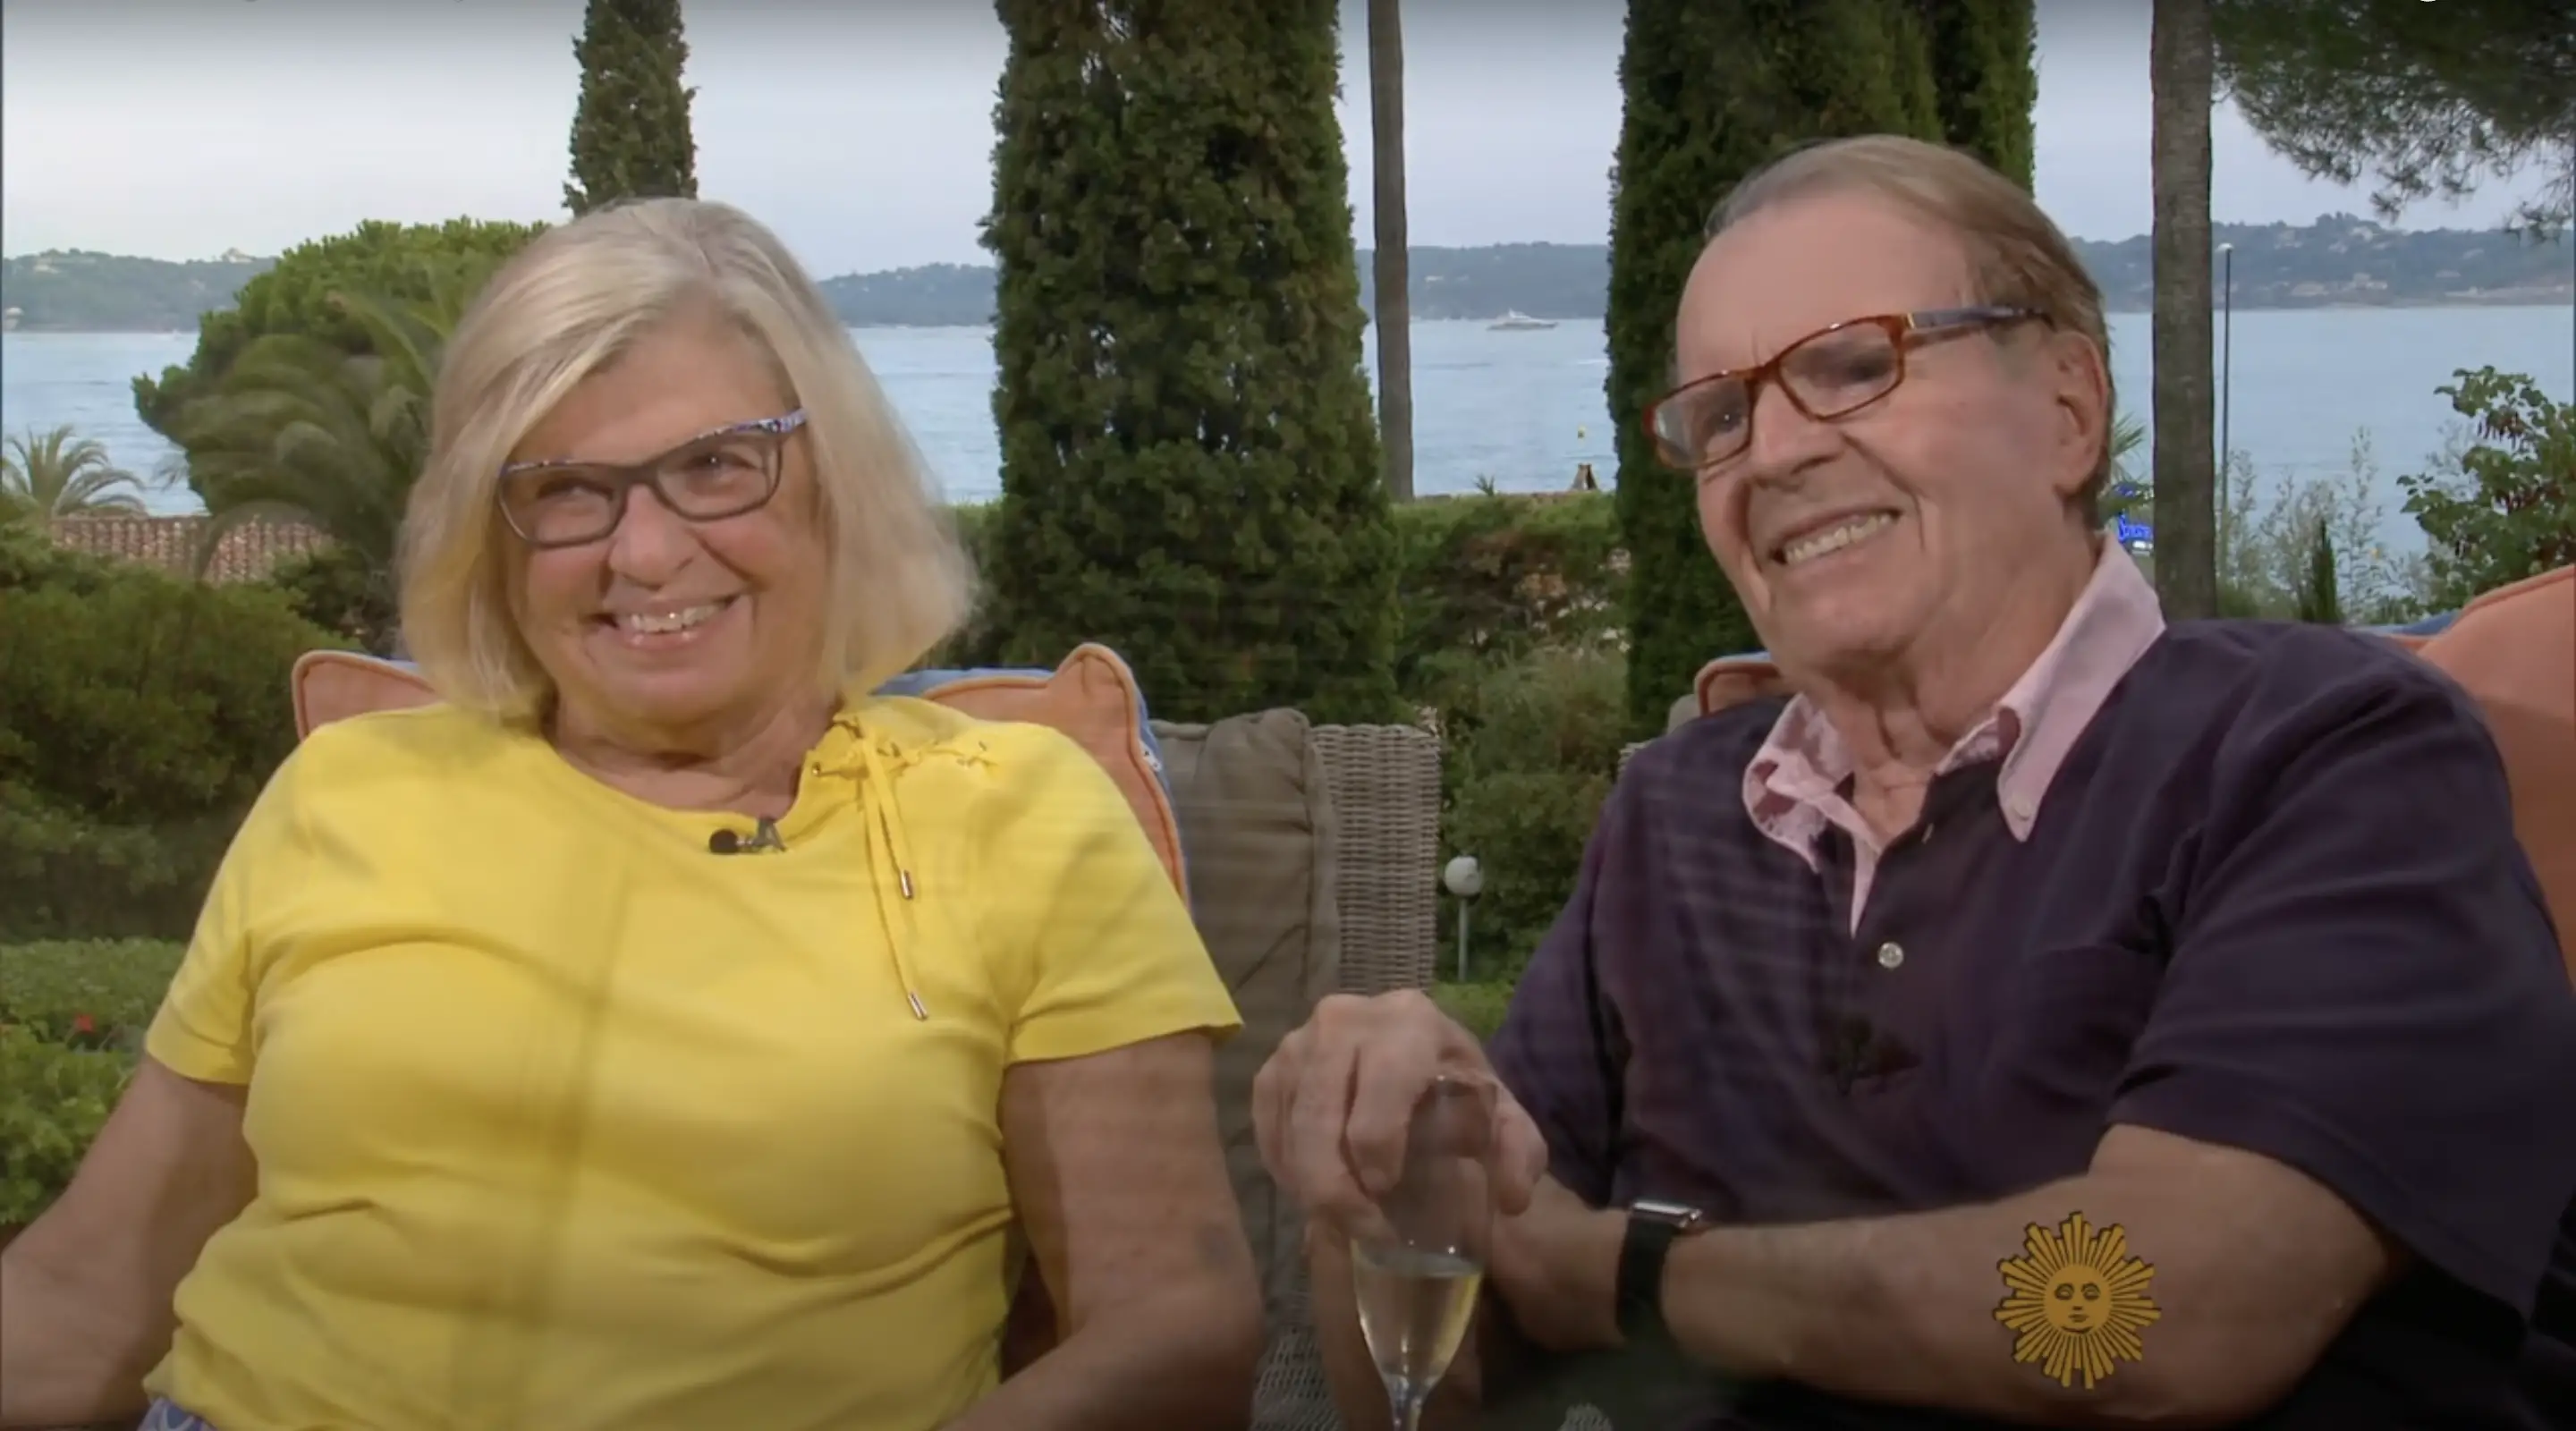 Charles Osgood and his wife, Jean, on a "CBS Sunday Morning" segment | Source: Youtube.com/@CBSSundayMorning